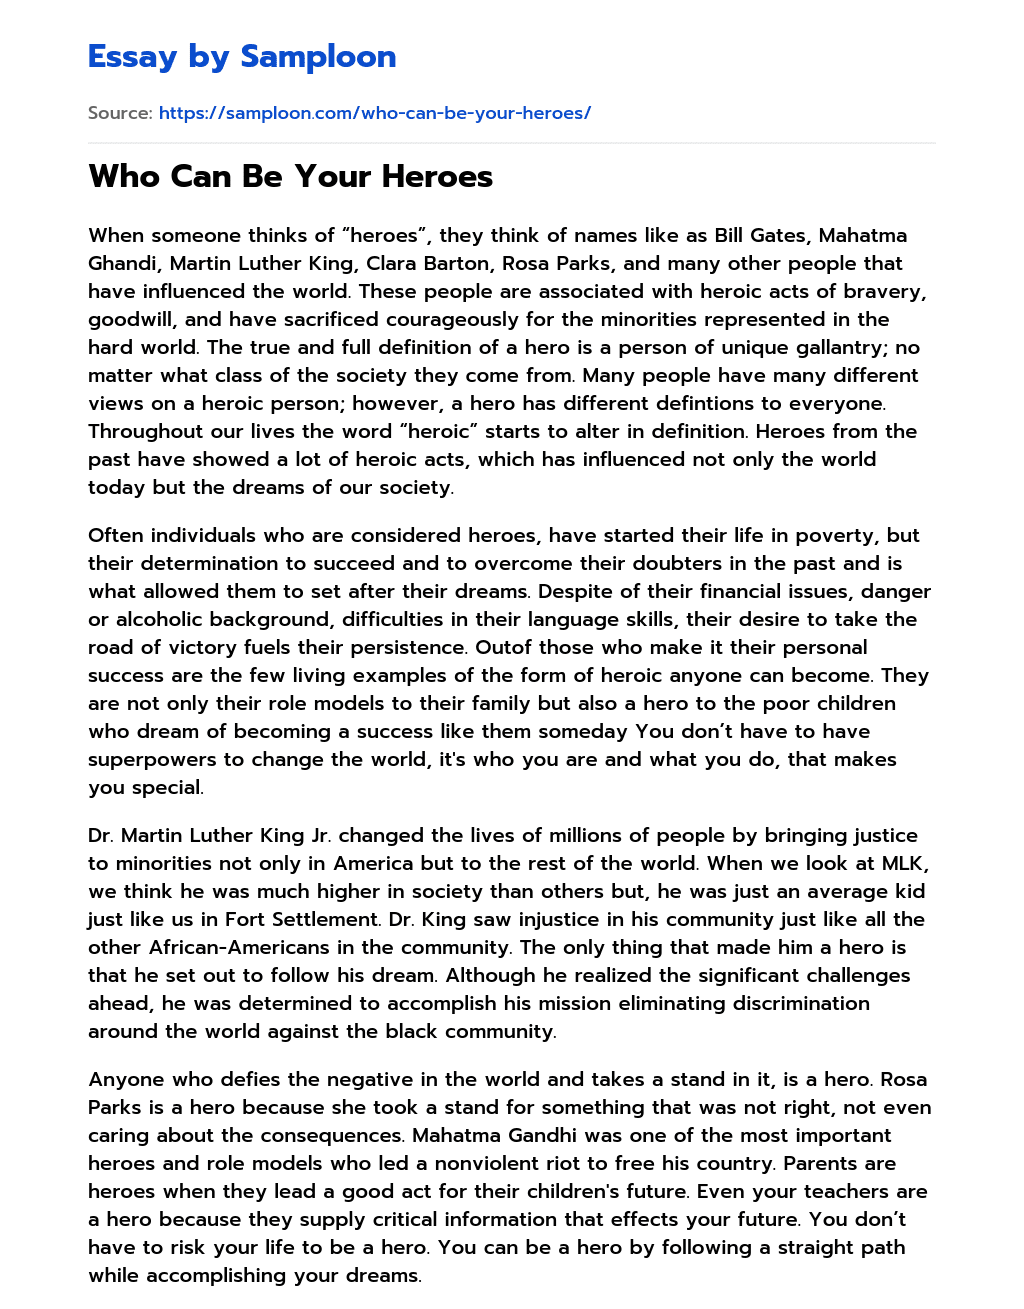 Who Can Be Your Heroes essay